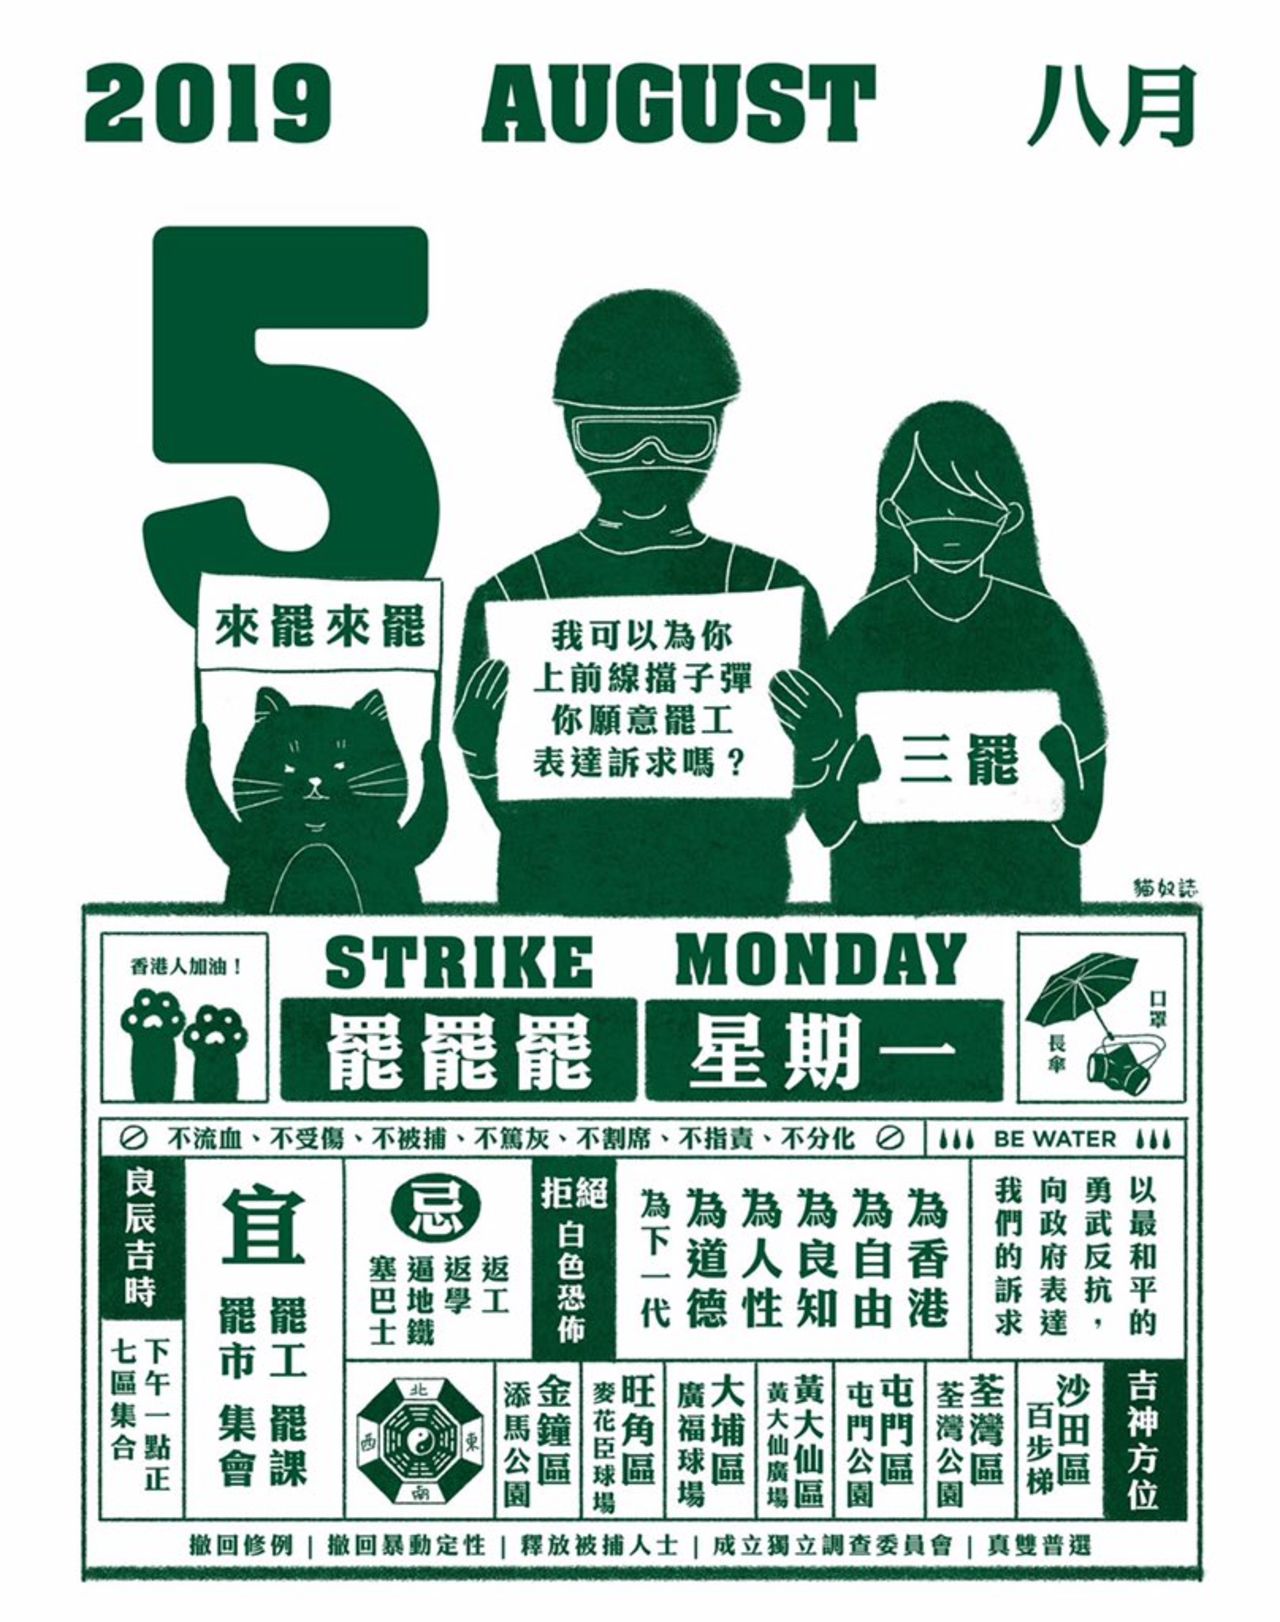 Referencing the design of Chinese paper calendars, this poster is urging Hong Kong people to strike. The widespread strikes on August 5, 2019, brought Hong Kong to a standstill. 2,300 aviation workers joined the strike, according to the Hong Kong Confederation of Trade Unions, leading to 224 canceled flights. 